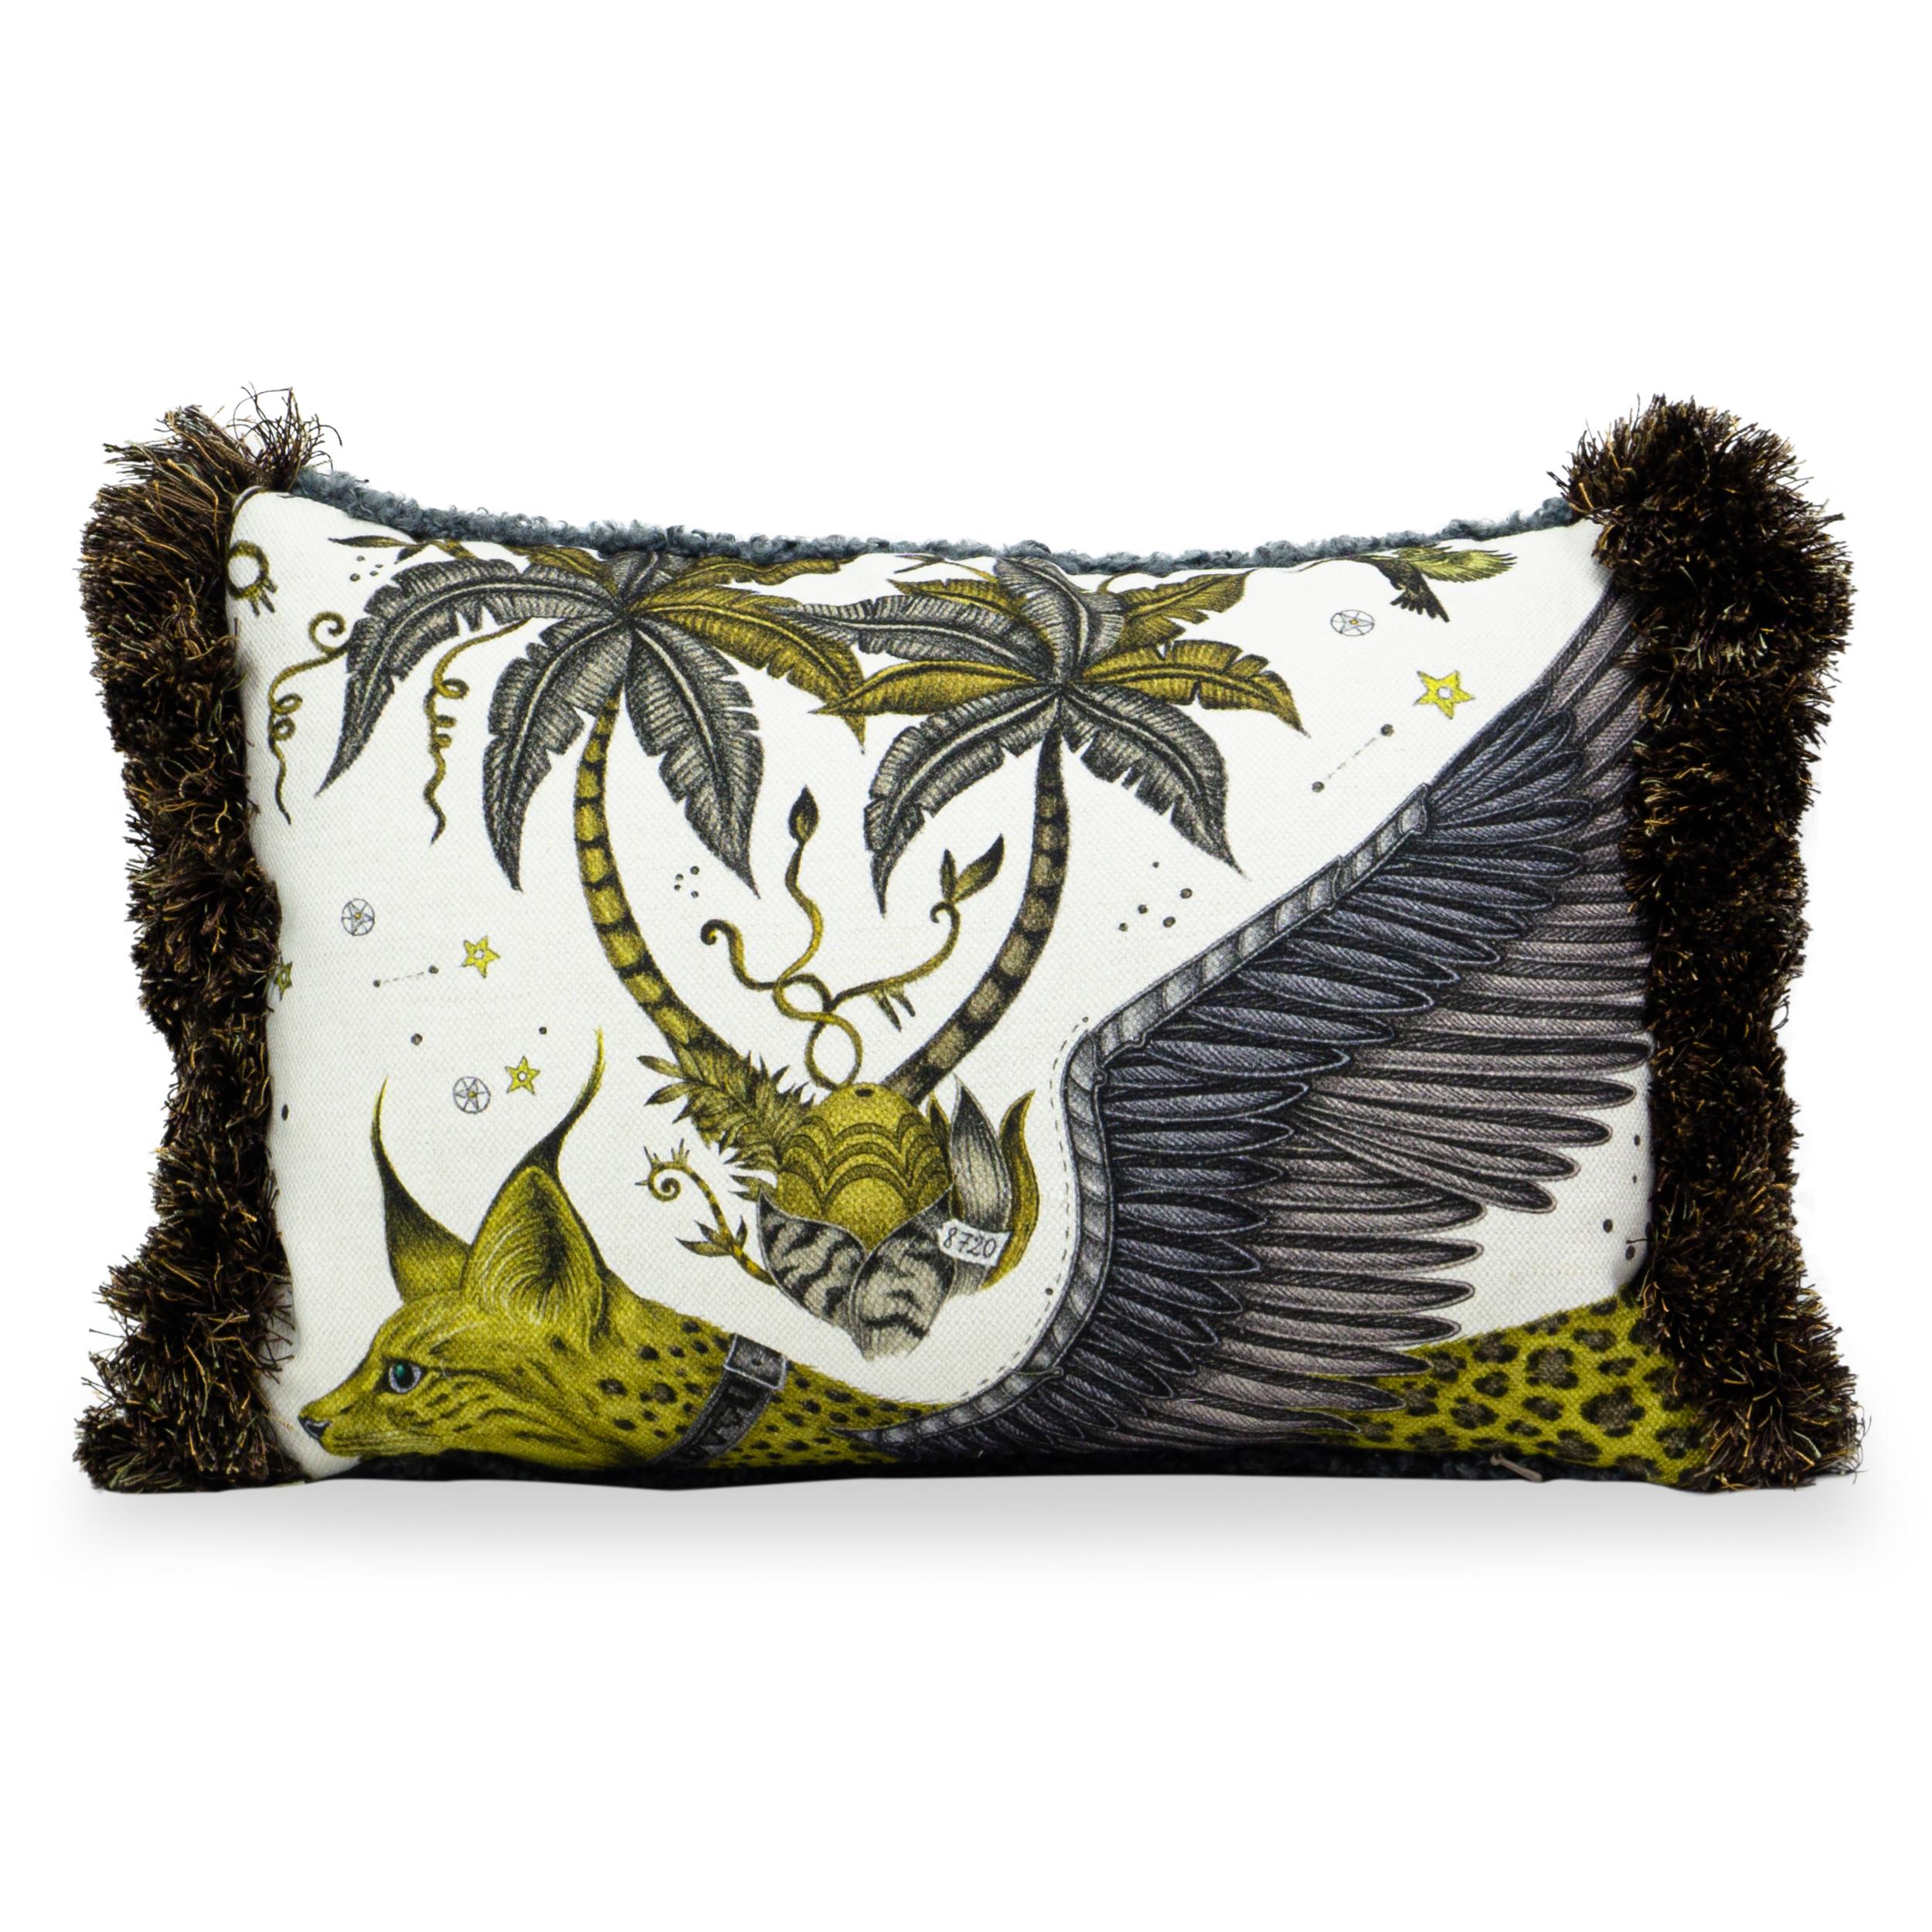 Fantastical lynx printed linen on pillow face with grey boucle on back and brush fringe trim.

Measurements:
Overall: 16”W x 13”H

Price As Shown: $1,225 as a pair
COM Price: $215 each
Customization may change price.

How We Work:
Made to